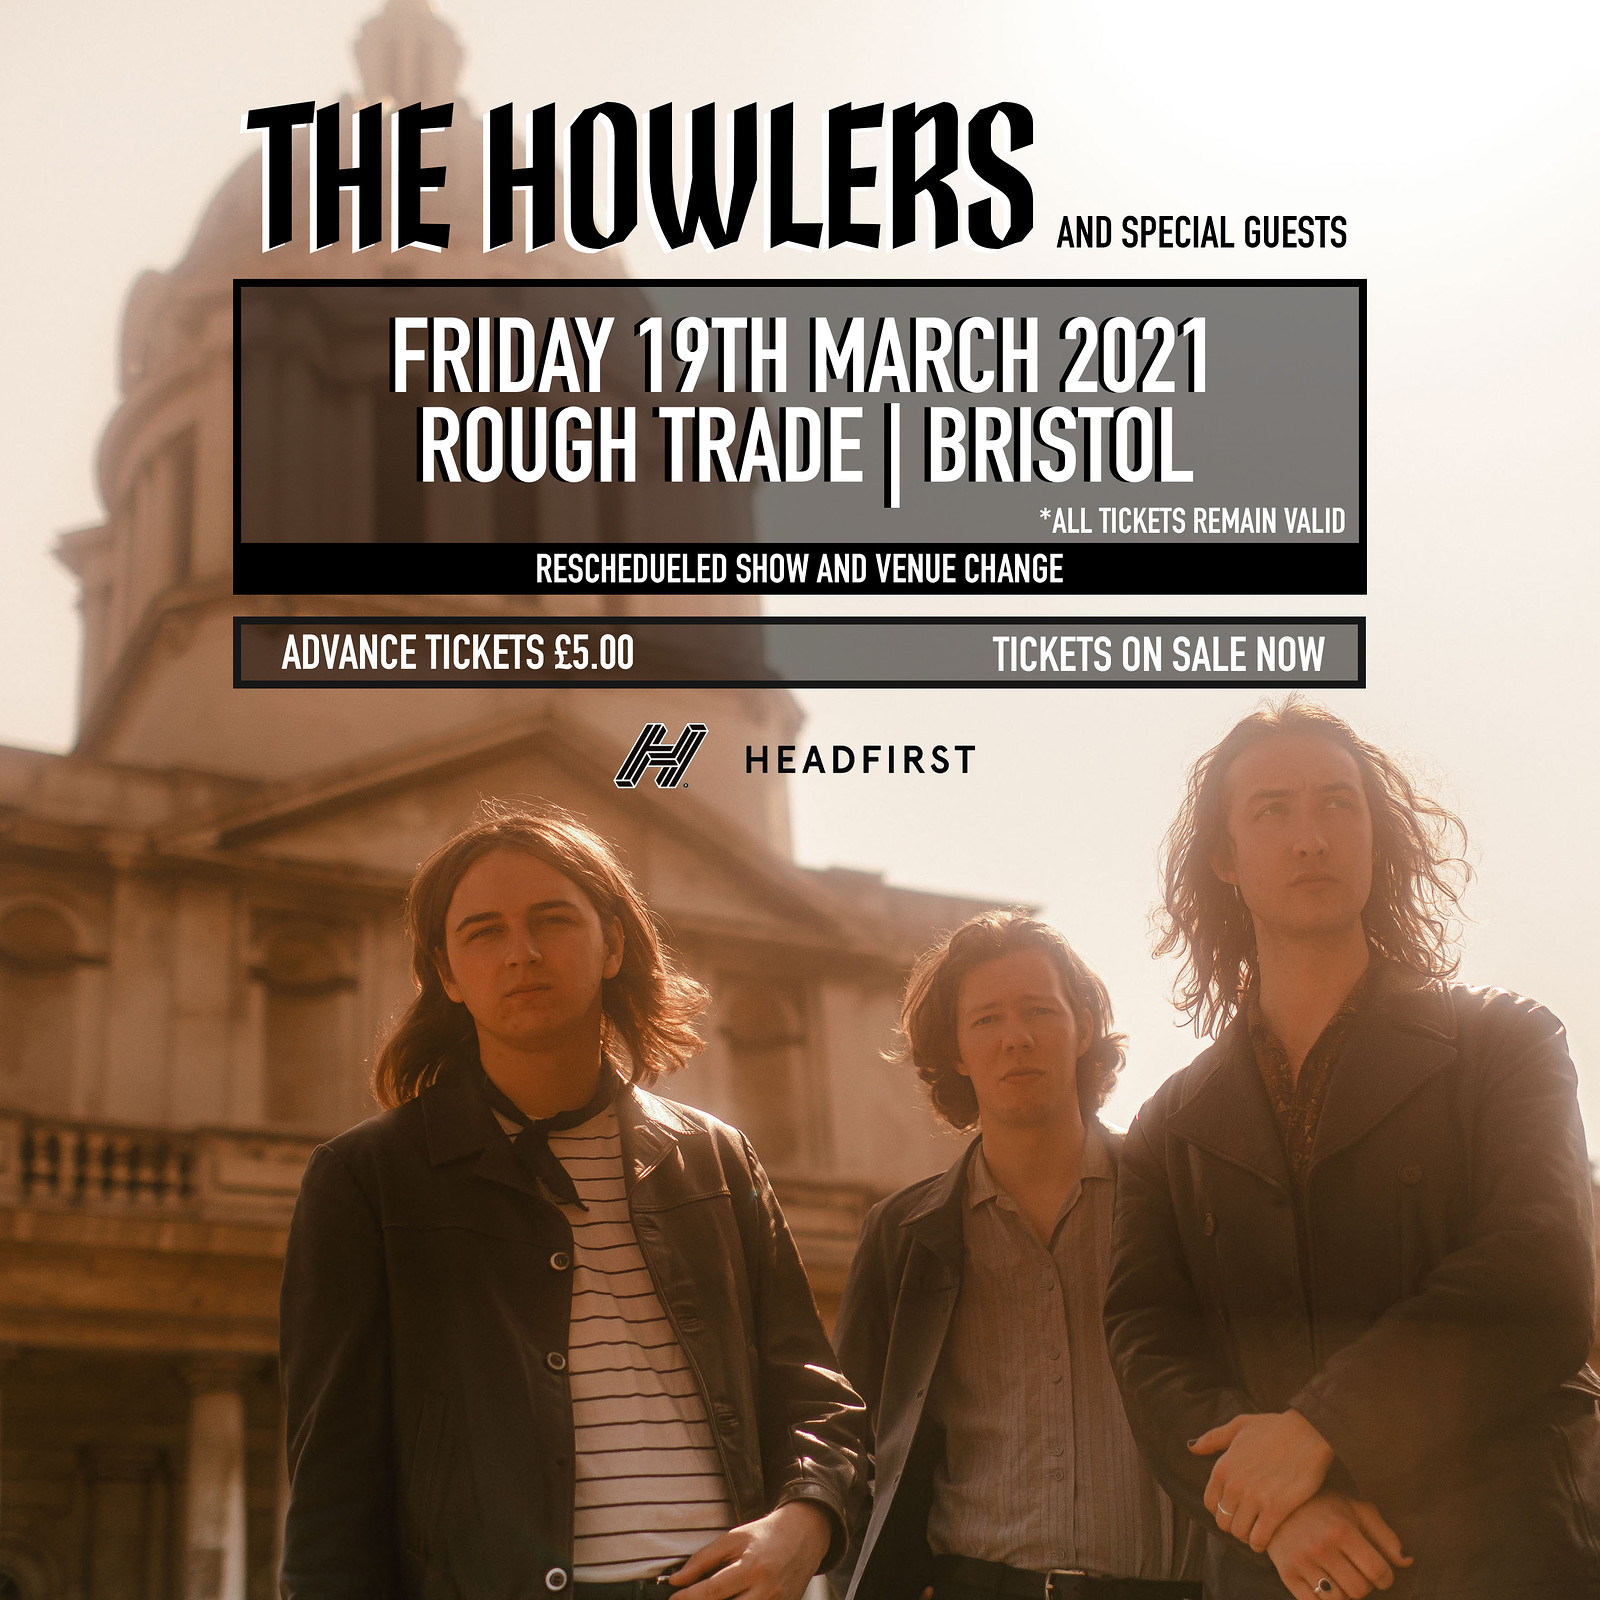 The Howlers / Wych Elm / Birdman Cult at Rough Trade Bristol